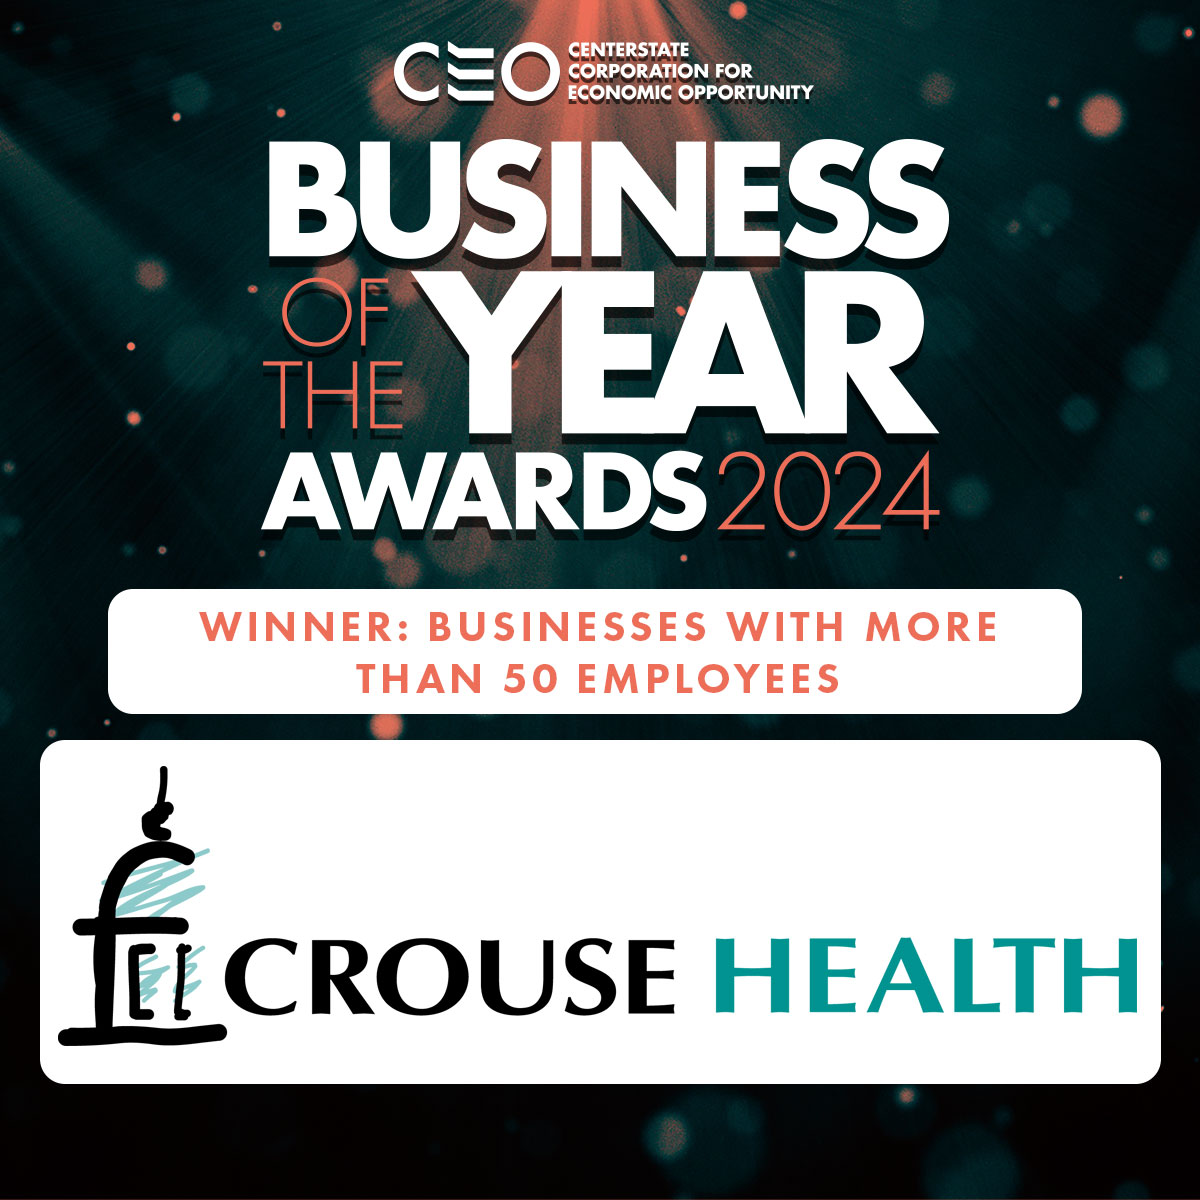 Crouse Health is excited to share that it has been named @CenterStateCEO's 2024 Business of the Year Award winner, in the Businesses with More Than 50 Employees category!